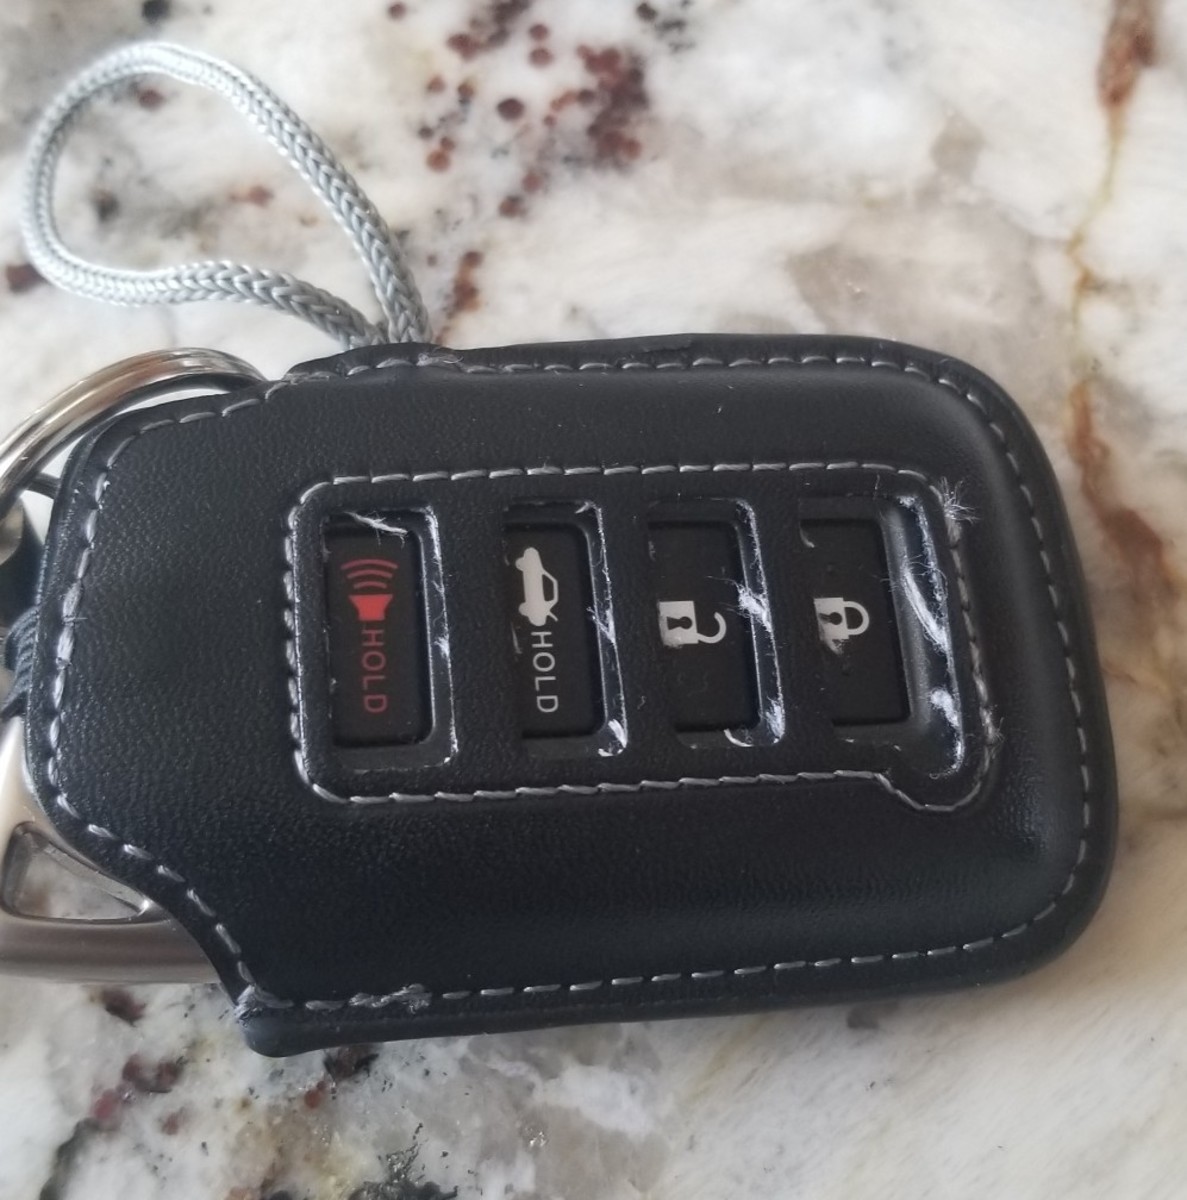 My key fob can generate noise with the click of a button.